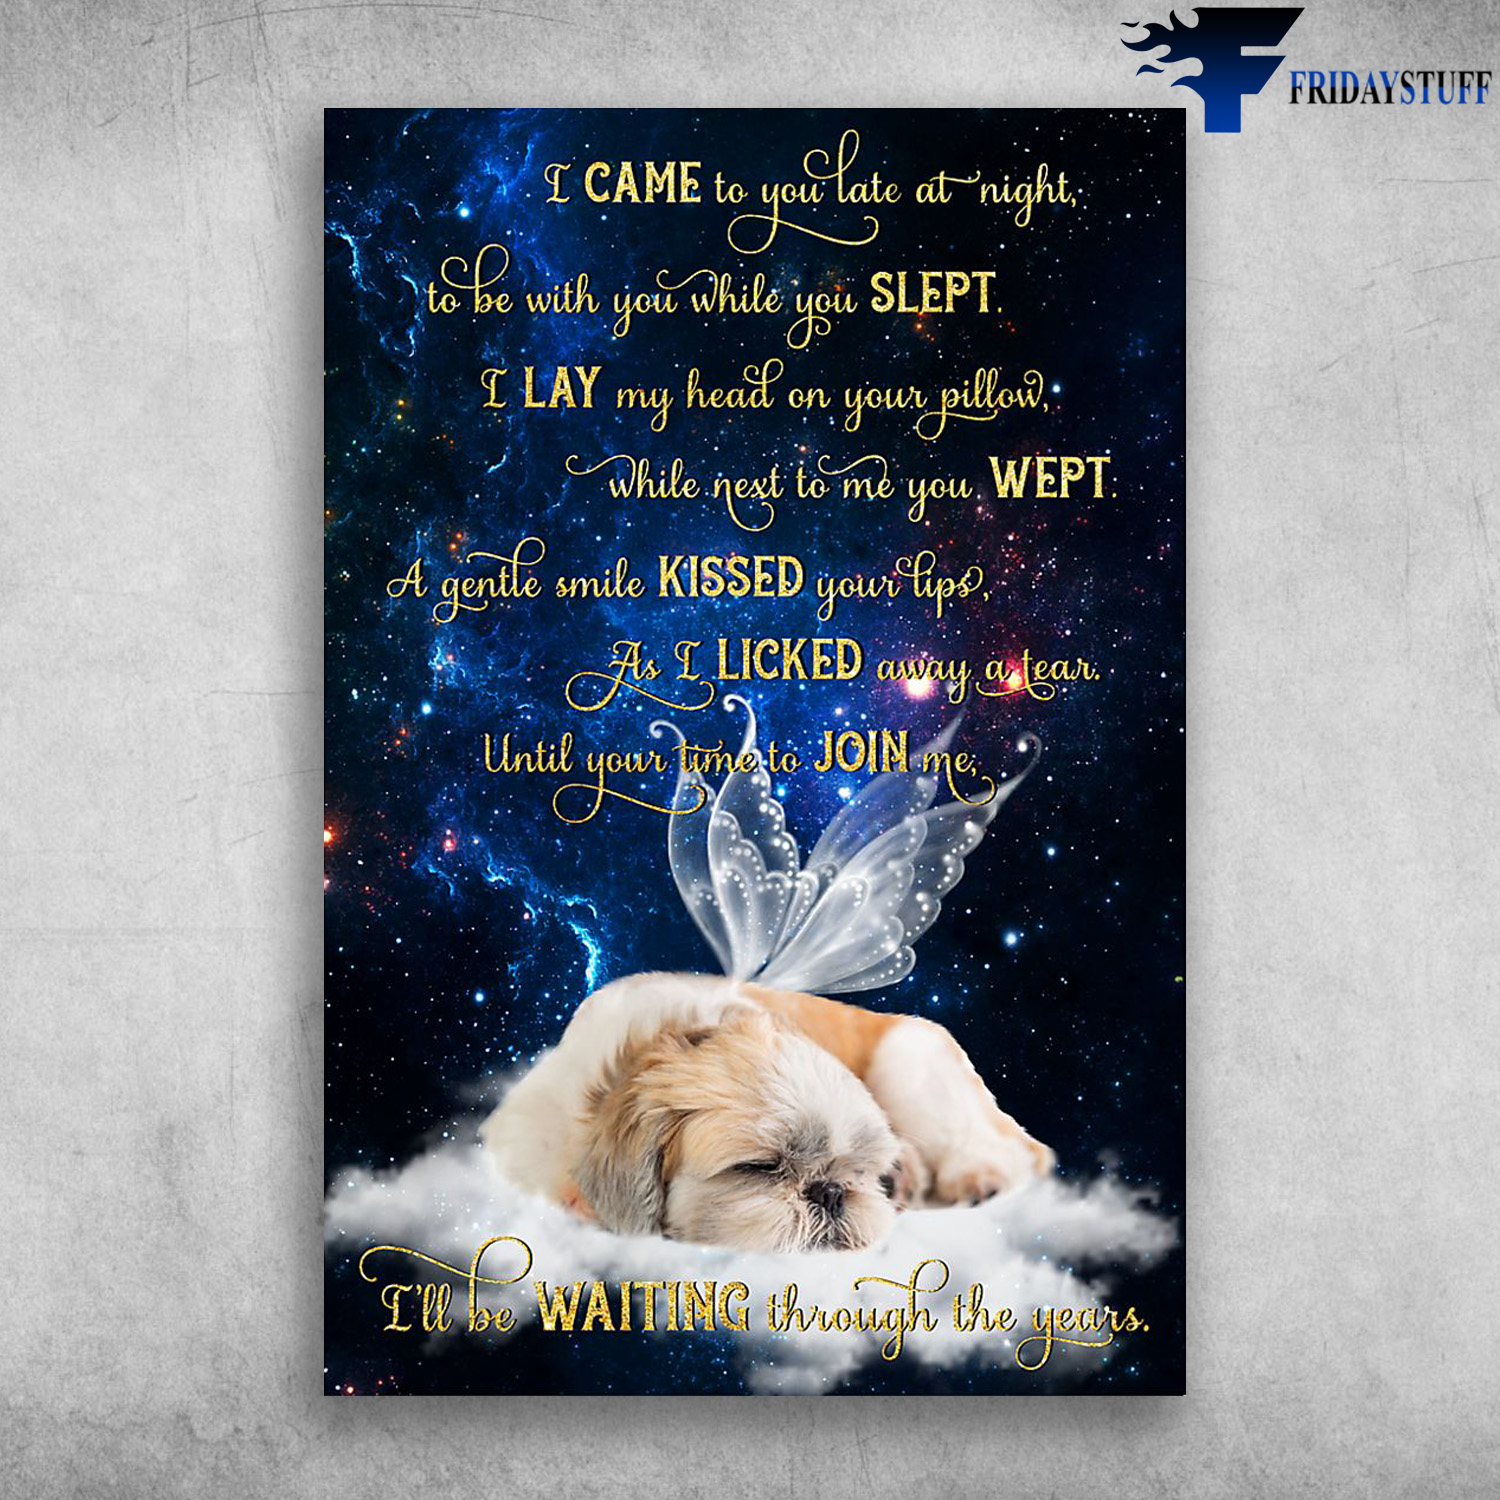 Shih Tzu Sleeping - I Came To You Late At Night, To Be With You While You Slept, I Lay My Head On Your Pillow, While Next To Me You Wept, A Gentle Smile Kissed Your Lips, As I Licked Away A Tear